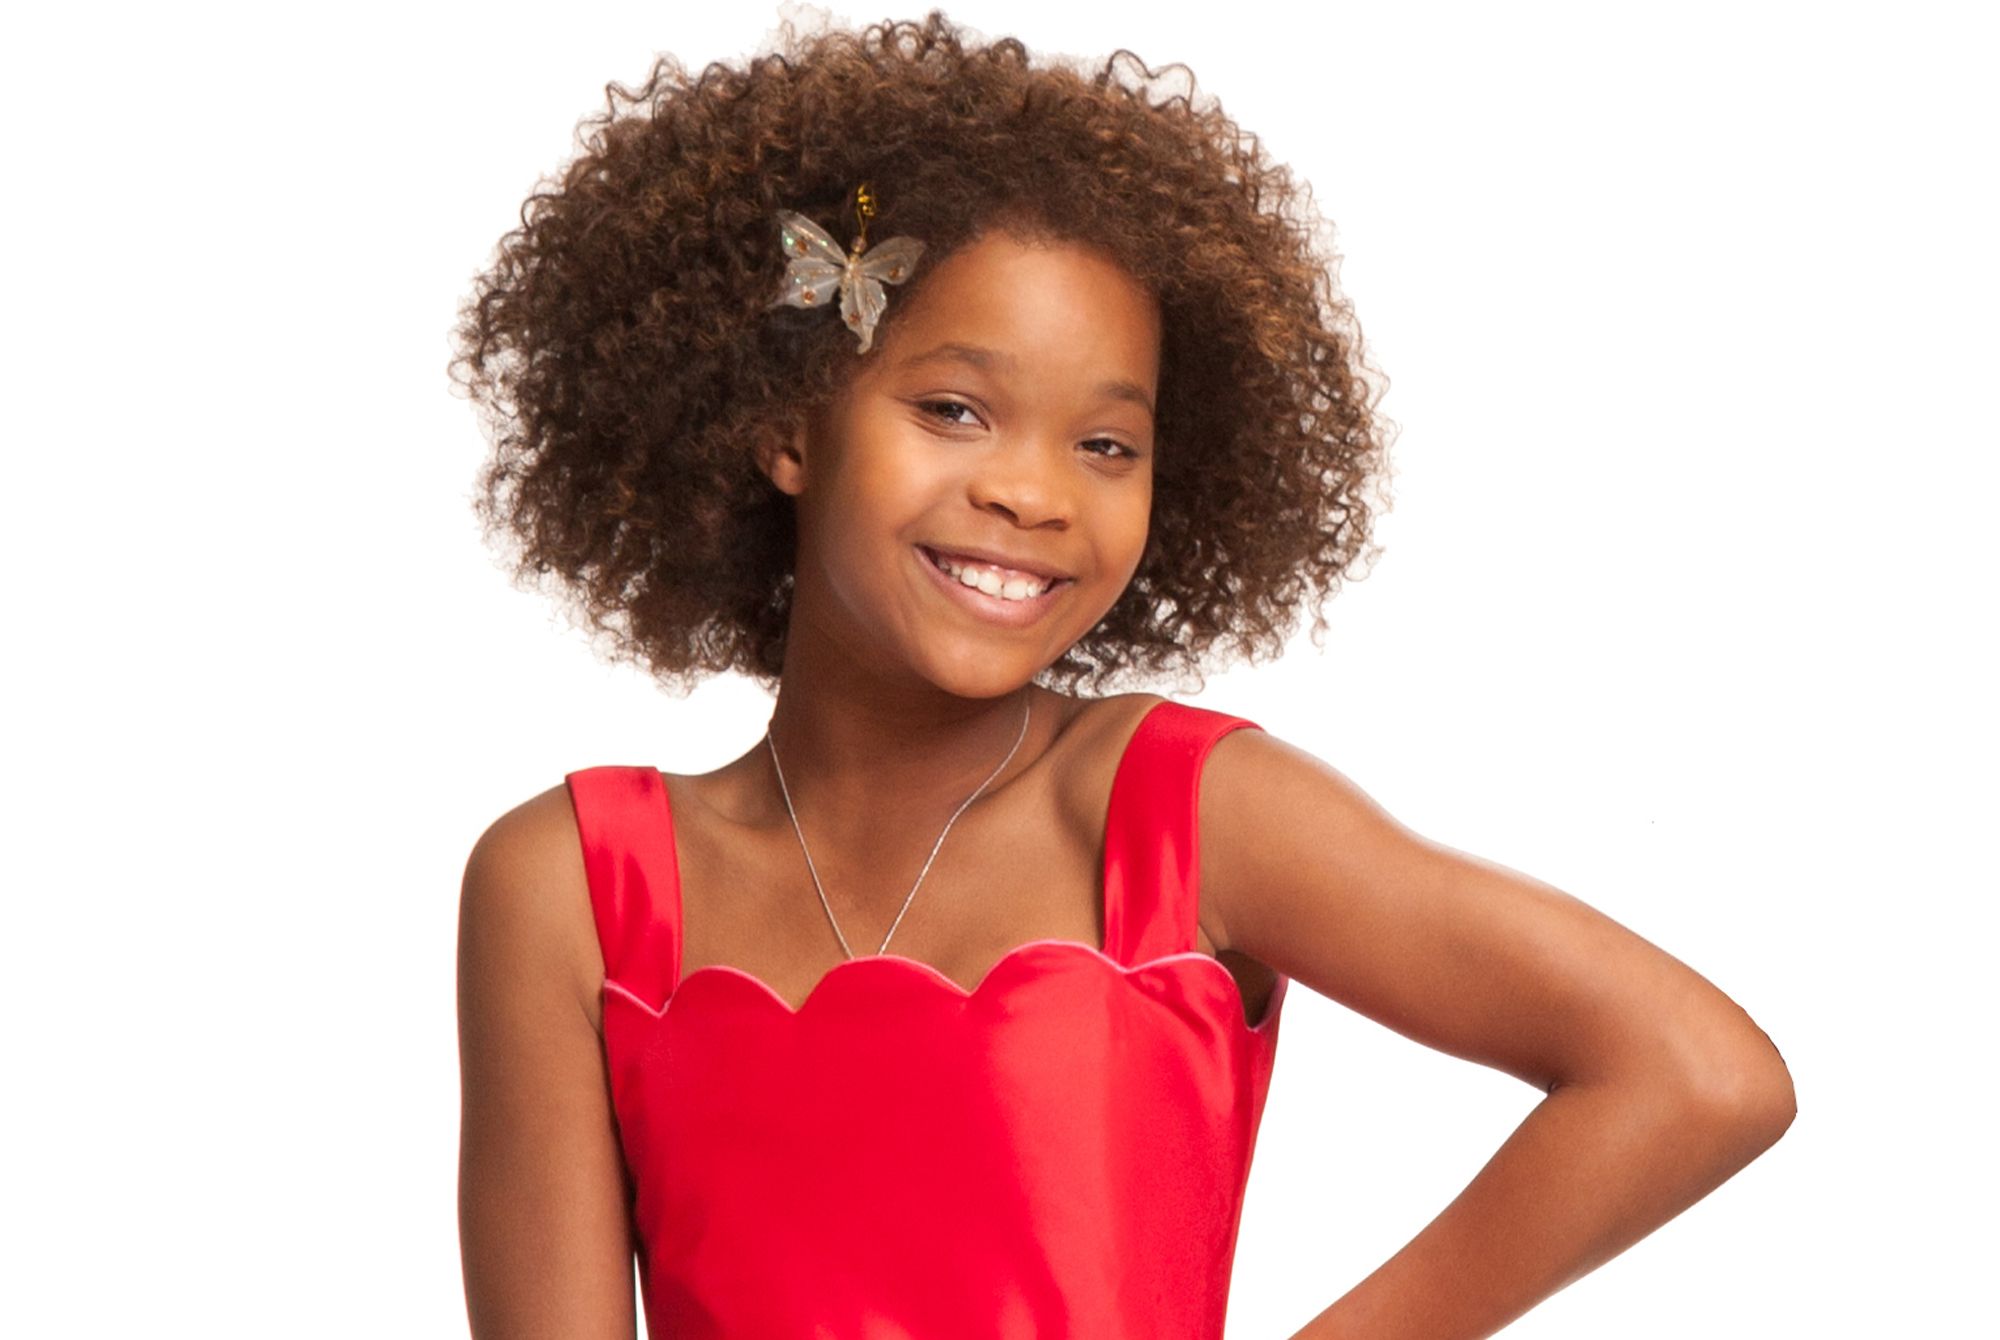 Annie' star is taking over Hollywood at just 11-years-old | New ...